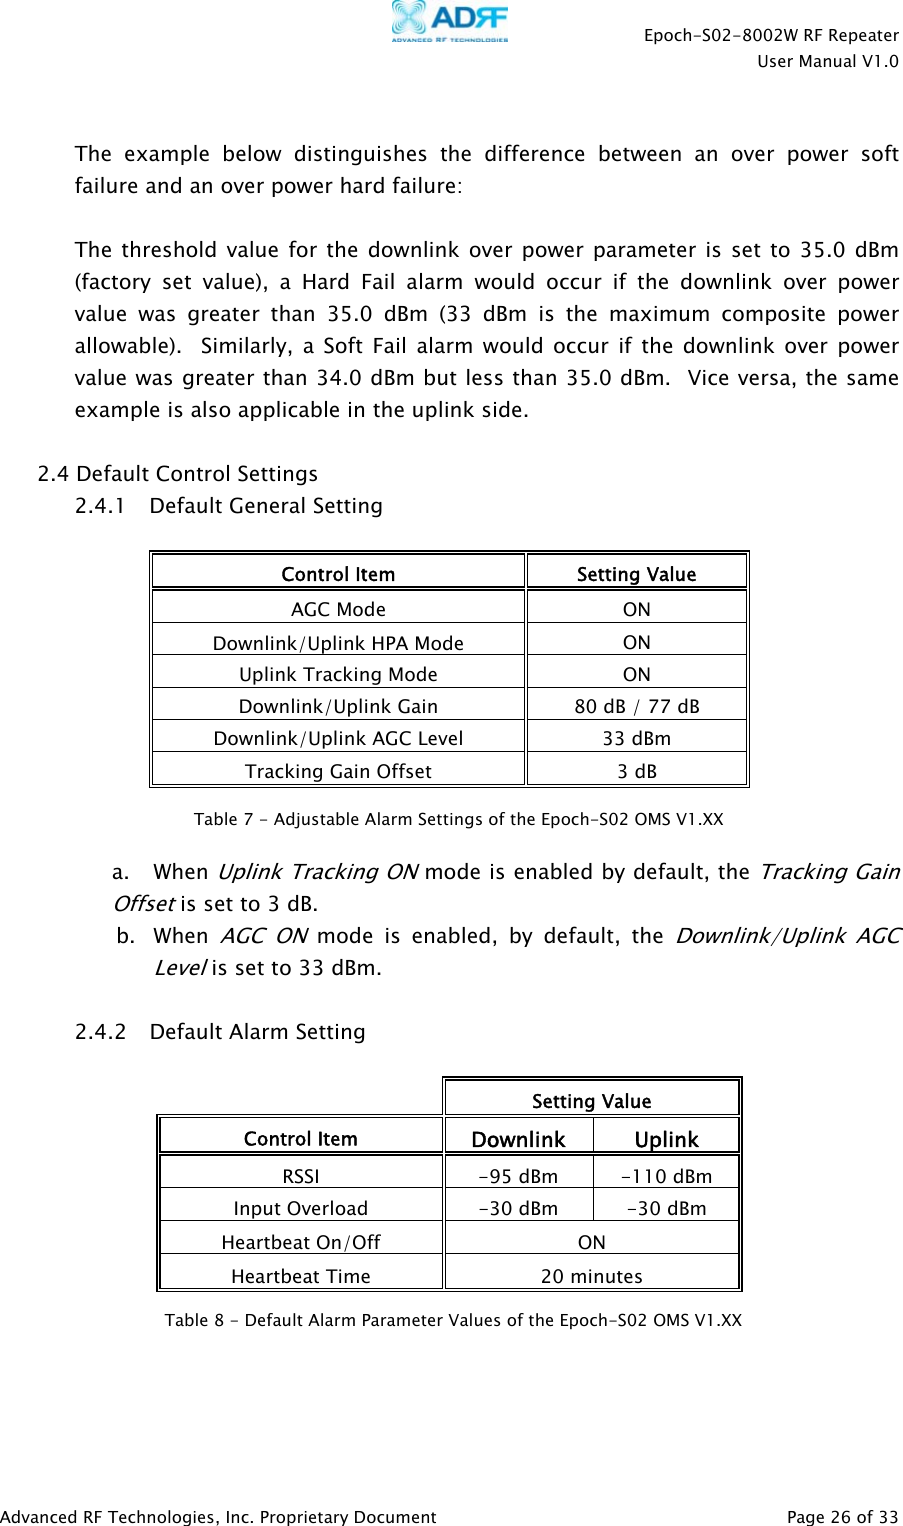    Epoch-S02-8002W RF Repeater  User Manual V1.0  Advanced RF Technologies, Inc. Proprietary Document   Page 26 of 33   The example below distinguishes the difference between an over power soft failure and an over power hard failure:  The threshold value for the downlink over power parameter is set to 35.0 dBm (factory set value), a Hard Fail alarm would occur if the downlink over power value was greater than 35.0 dBm (33 dBm is the maximum composite power allowable).  Similarly, a Soft Fail alarm would occur if the downlink over power value was greater than 34.0 dBm but less than 35.0 dBm.  Vice versa, the same example is also applicable in the uplink side.  2.4 Default Control Settings 2.4.1 Default General Setting  Control Item  Setting Value AGC Mode  ON Downlink/Uplink HPA Mode   ON Uplink Tracking Mode  ON Downlink/Uplink Gain  80 dB / 77 dB Downlink/Uplink AGC Level  33 dBm Tracking Gain Offset  3 dB   a.   When Uplink Tracking ON mode is enabled by default, the Tracking Gain Offset is set to 3 dB. b. When AGC ON mode is enabled, by default, the Downlink/Uplink AGC Level is set to 33 dBm.  2.4.2 Default Alarm Setting   Setting Value Control Item  Downlink Uplink RSSI   -95 dBm  -110 dBm Input Overload  -30 dBm  -30 dBm Heartbeat On/Off  ON Heartbeat Time  20 minutes    Table 8 - Default Alarm Parameter Values of the Epoch-S02 OMS V1.XX Table 7 - Adjustable Alarm Settings of the Epoch-S02 OMS V1.XX 